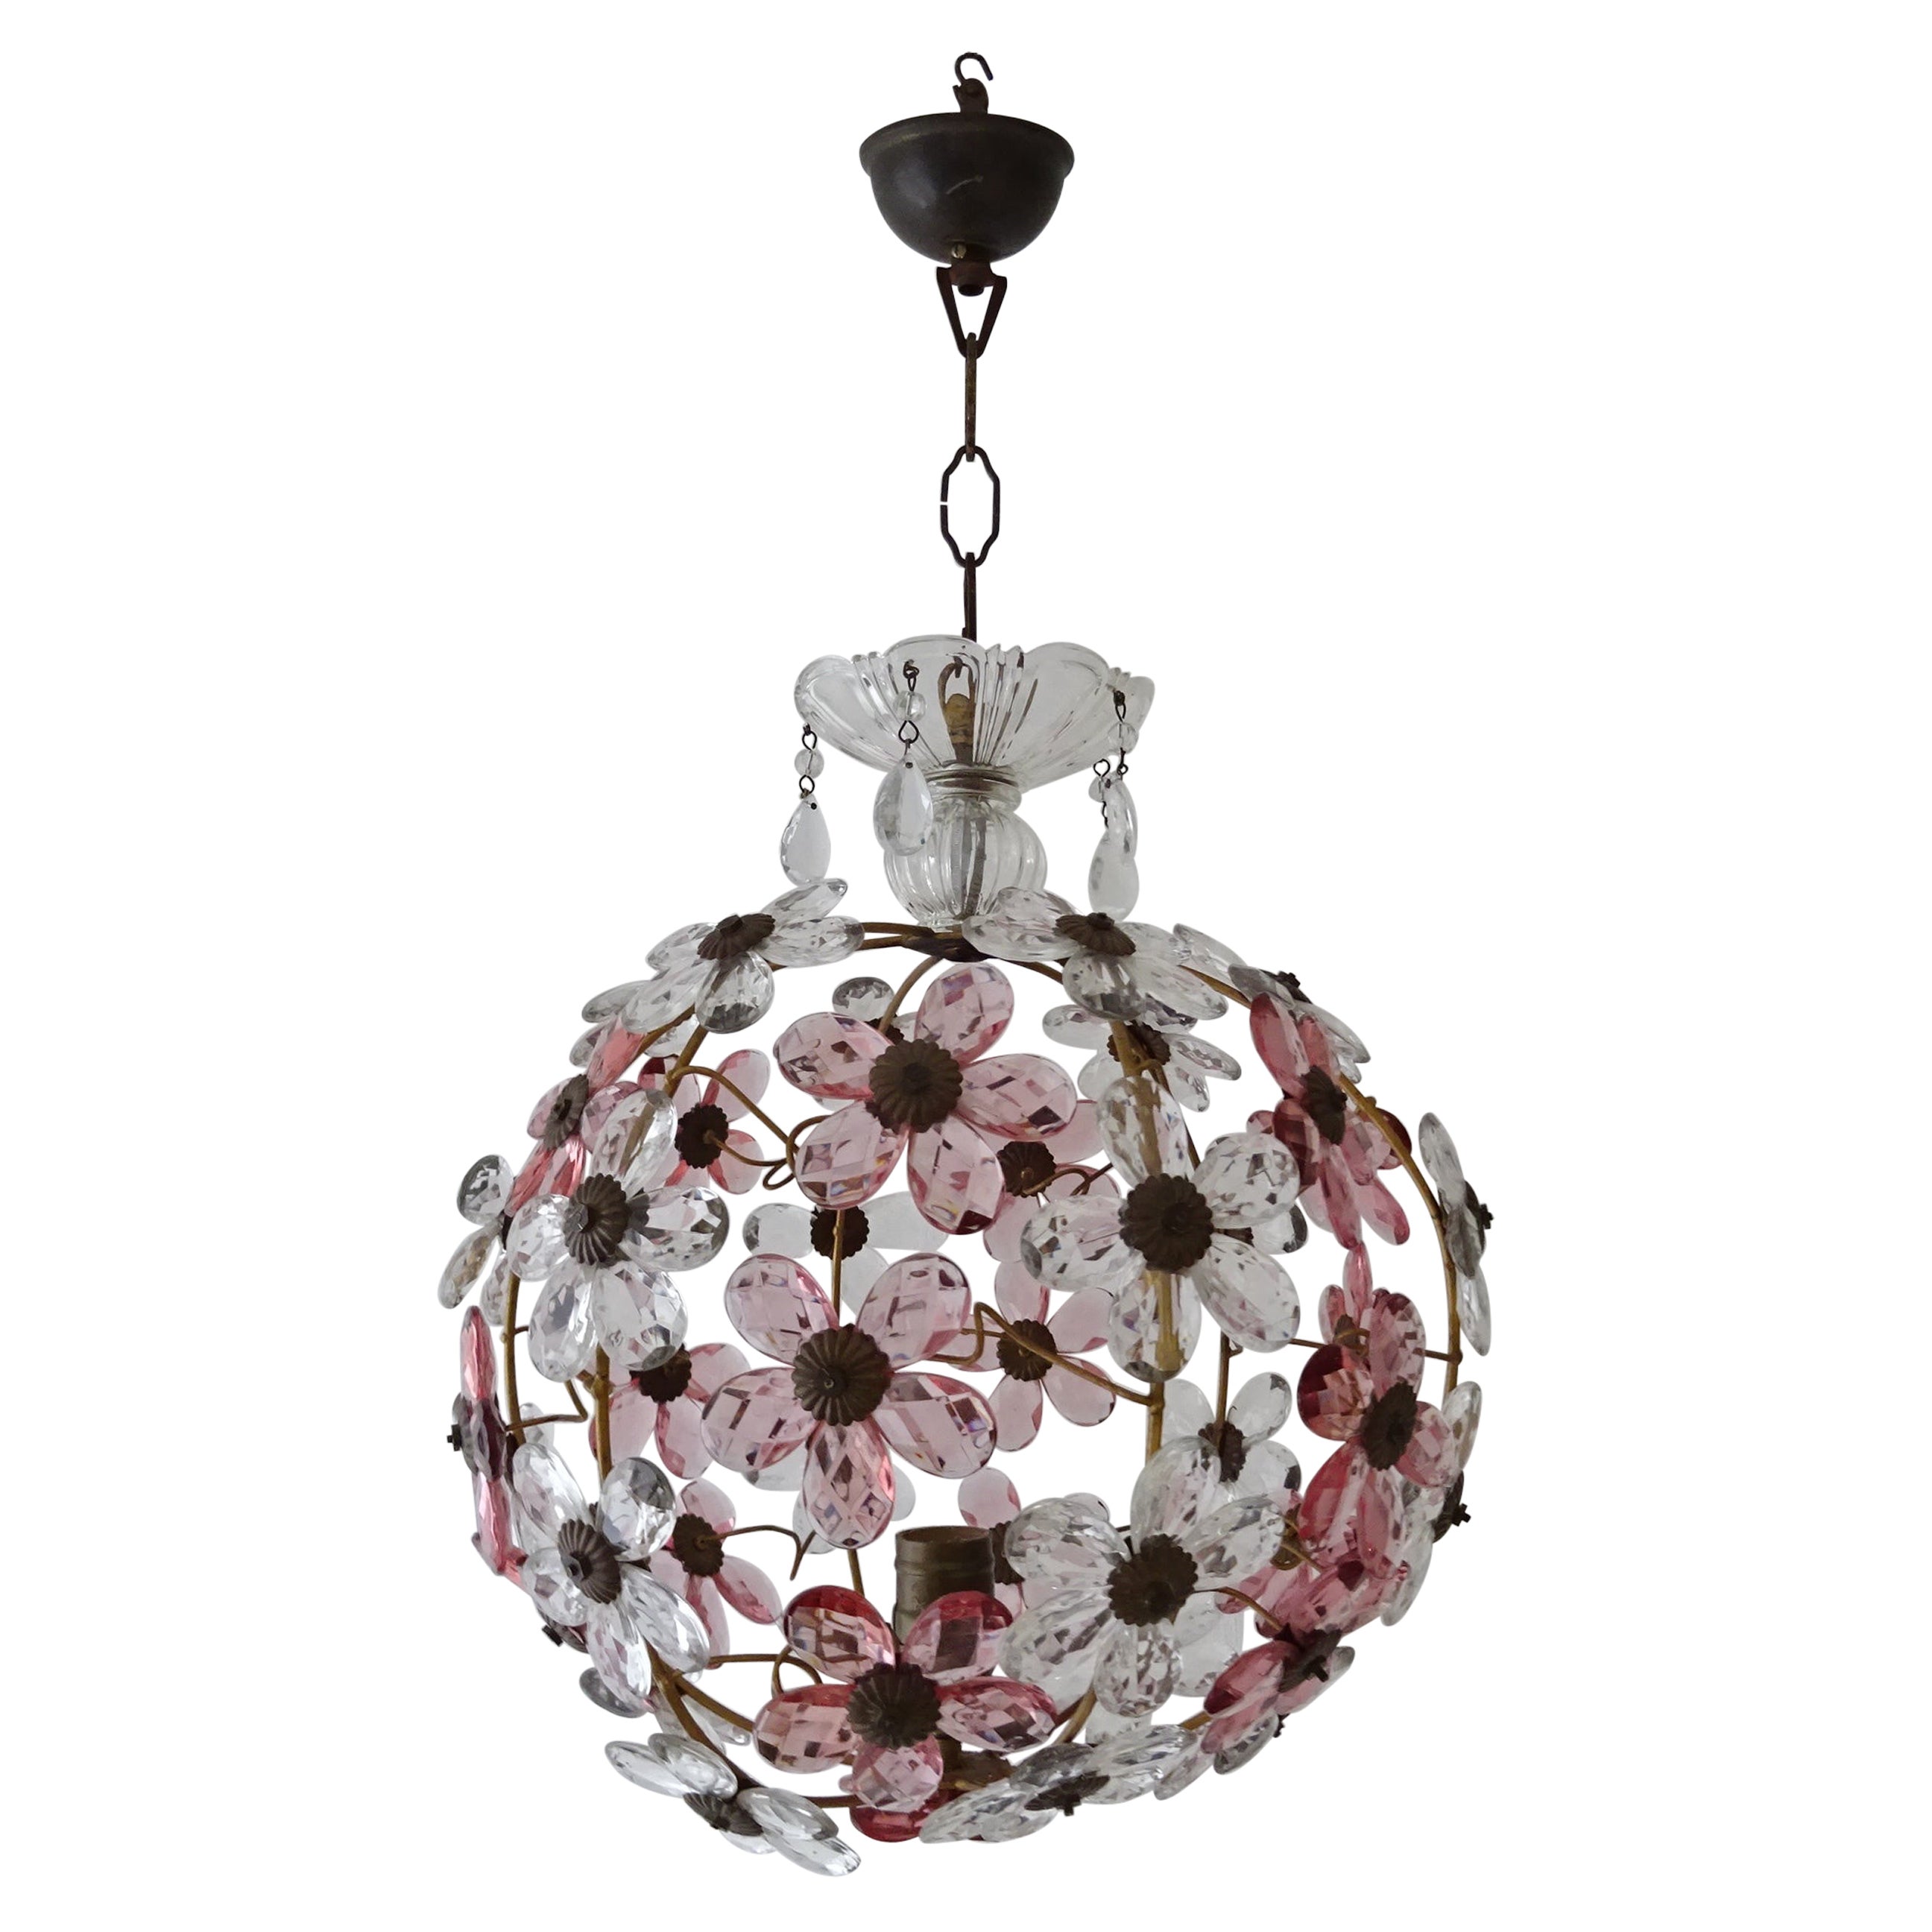 Big French Pink Flower Ball Crystal Prisms Maison Baguès Style Chandelier, 1920s